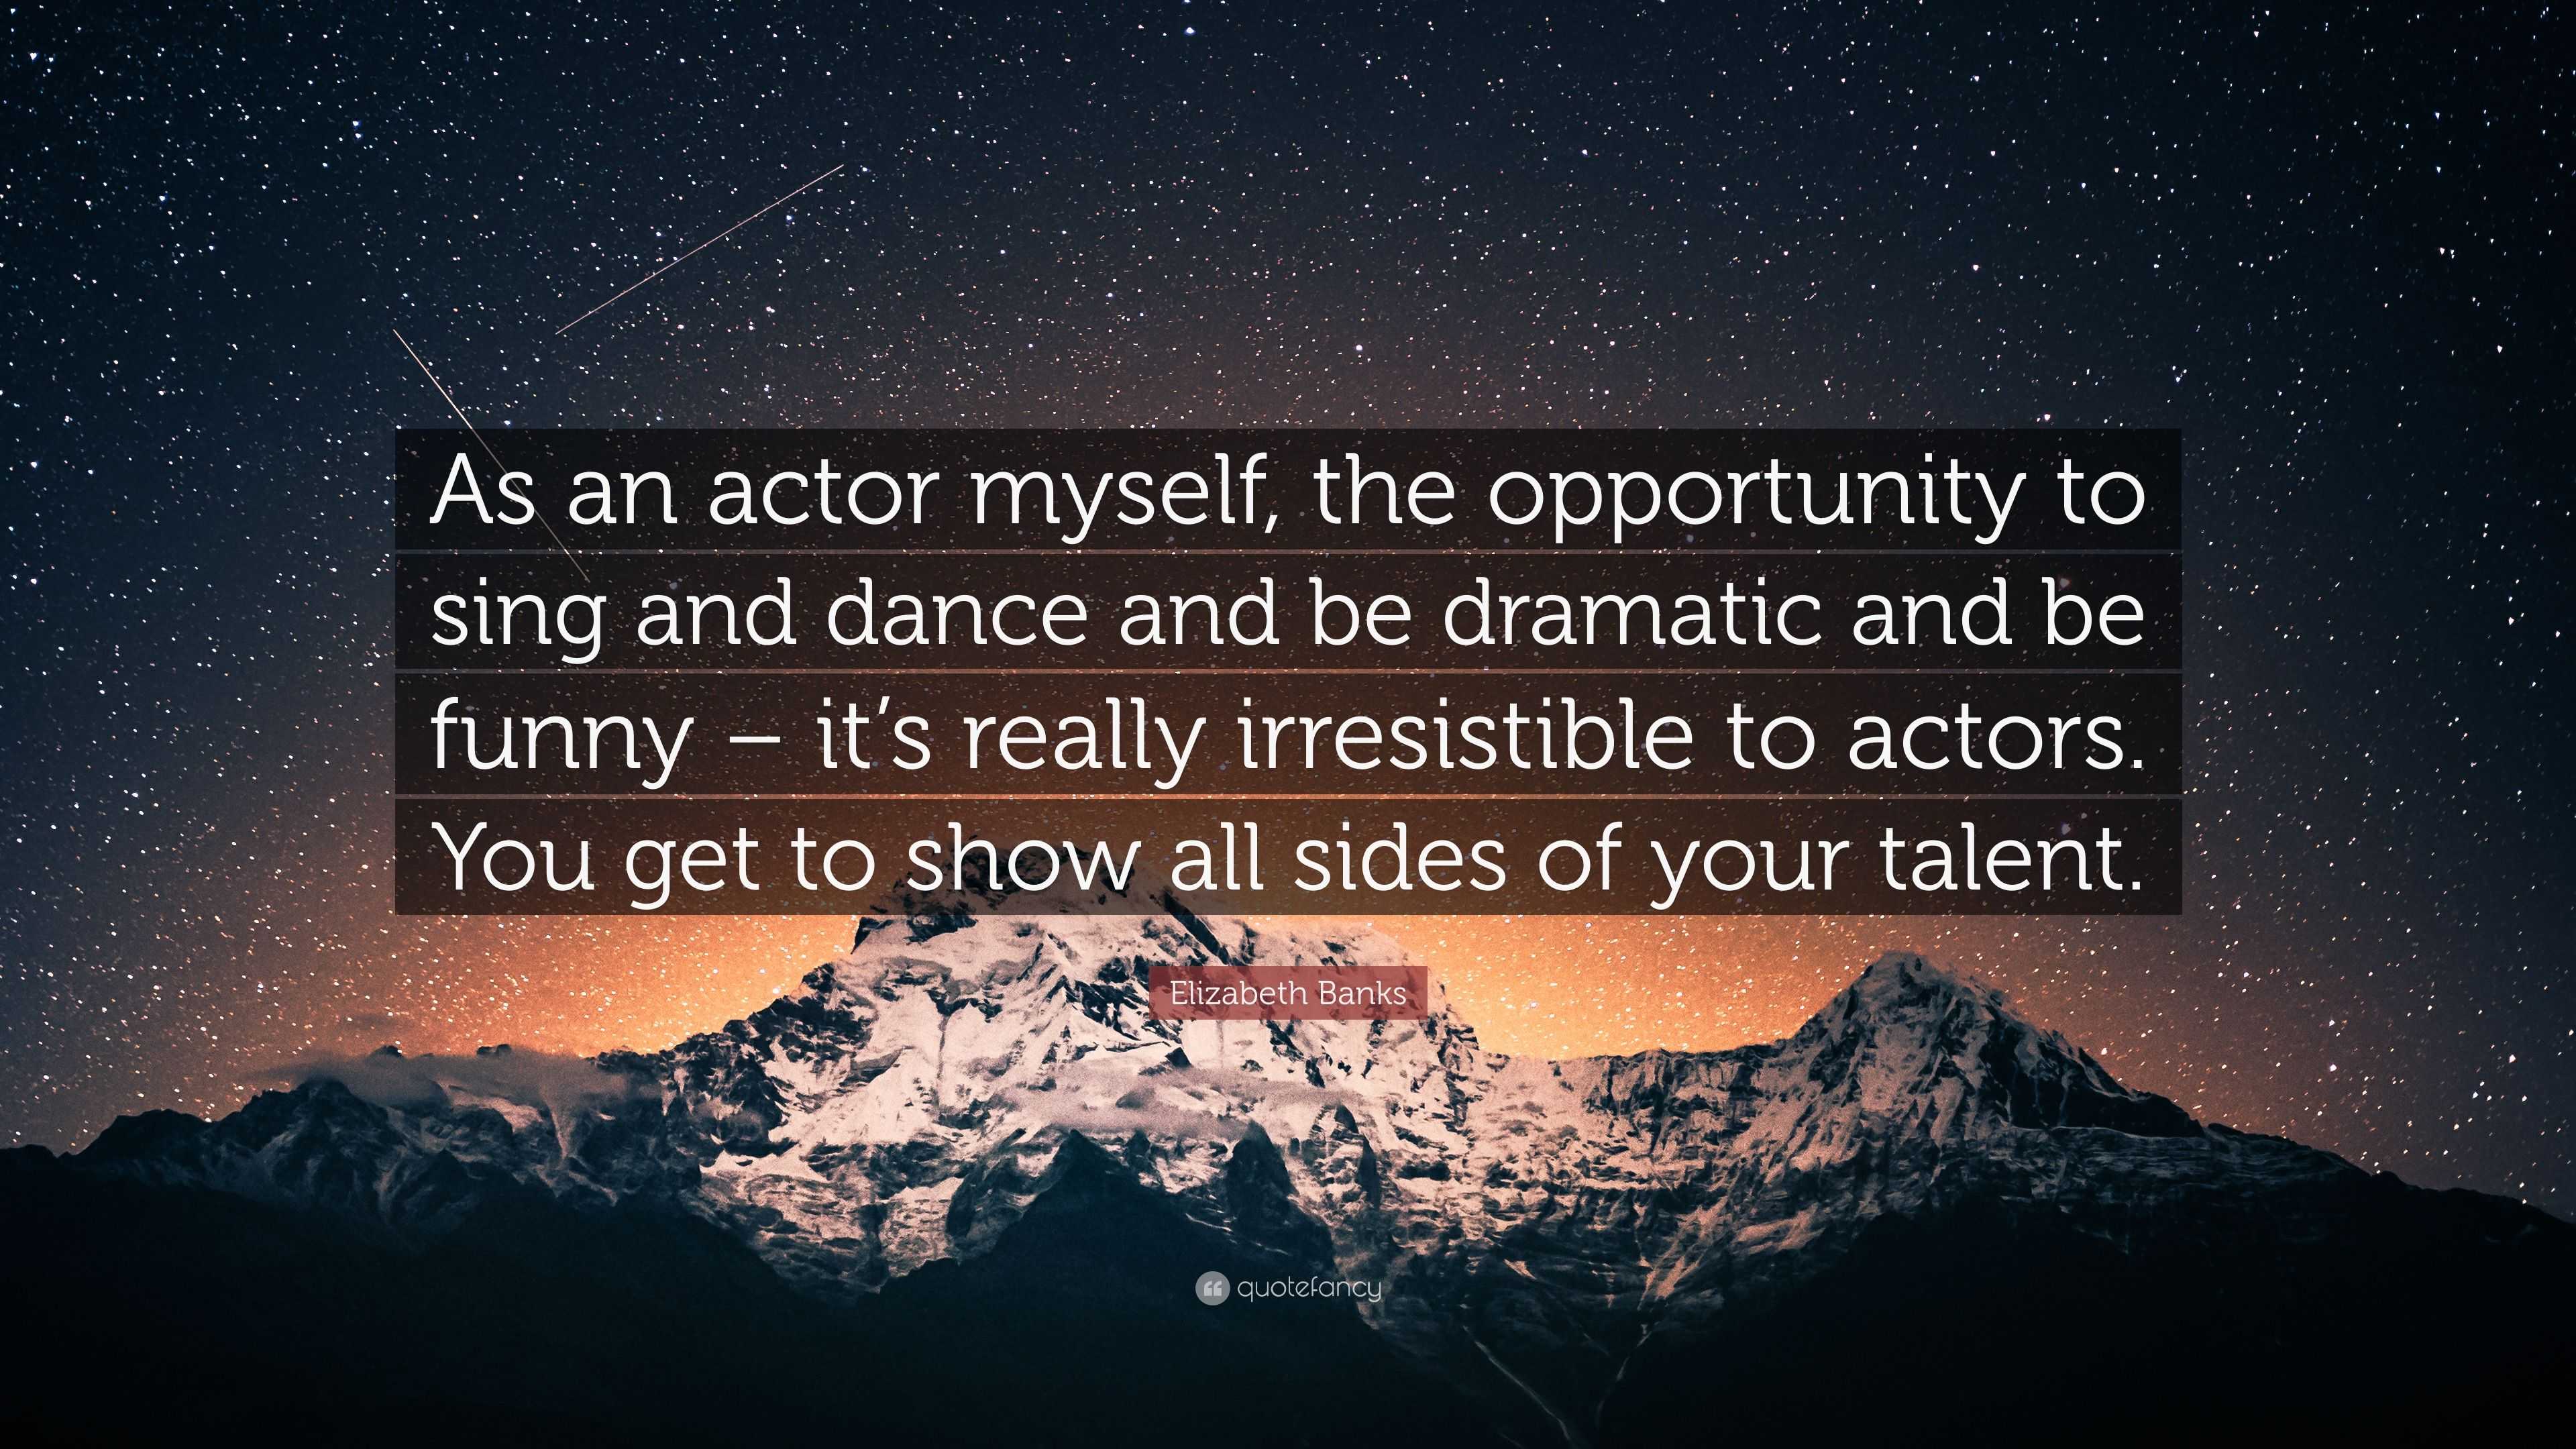 Elizabeth Banks Quote: “As an actor myself, the opportunity to sing and  dance and be dramatic and be funny – it's really irresistible to actors....”